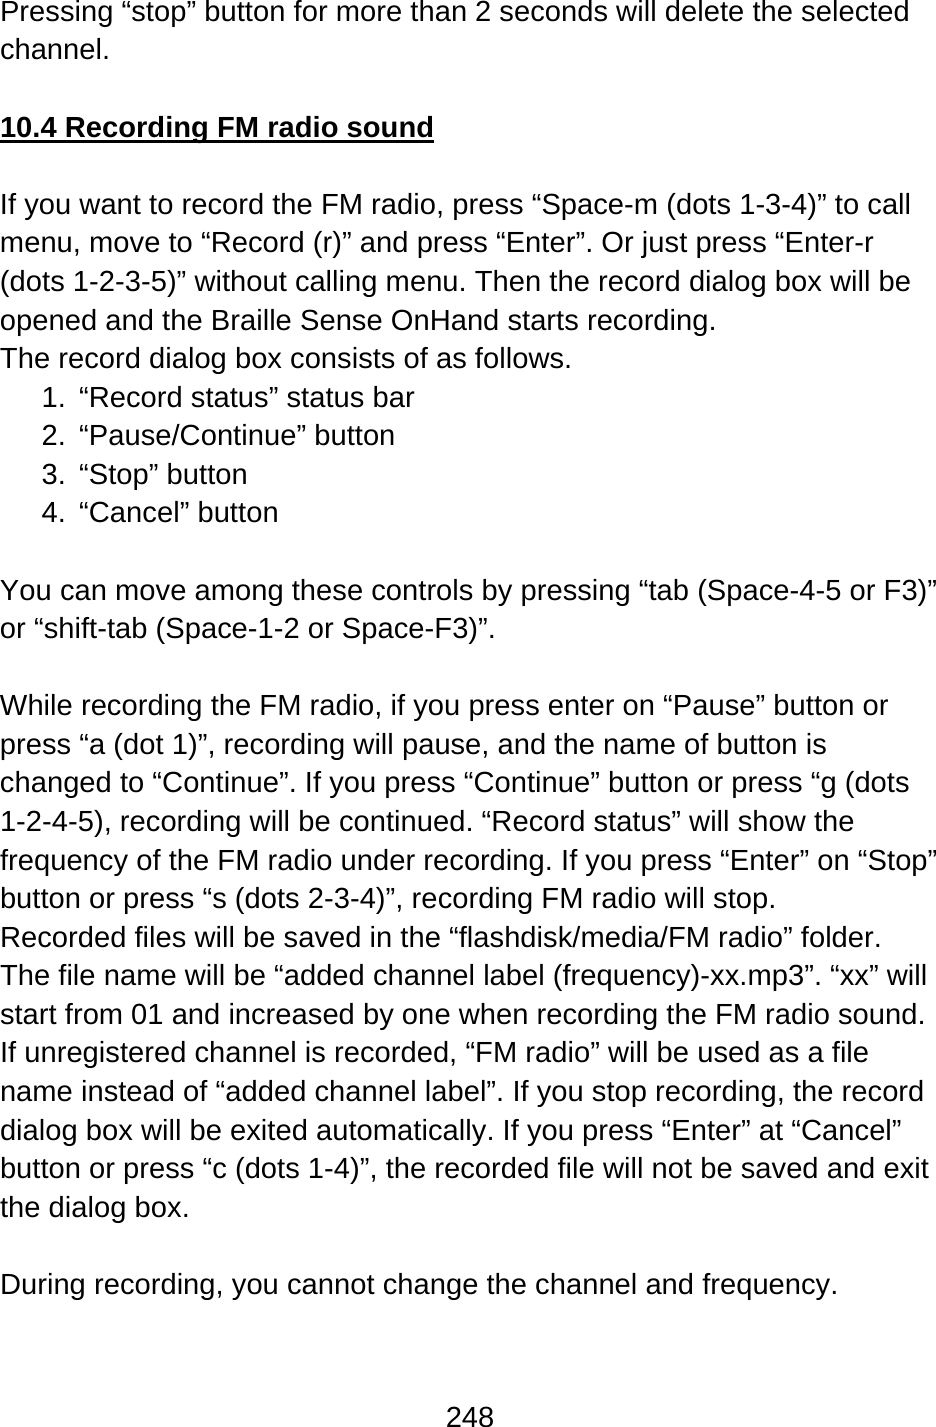 248  Pressing “stop” button for more than 2 seconds will delete the selected channel.  10.4 Recording FM radio sound  If you want to record the FM radio, press “Space-m (dots 1-3-4)” to call menu, move to “Record (r)” and press “Enter”. Or just press “Enter-r (dots 1-2-3-5)” without calling menu. Then the record dialog box will be opened and the Braille Sense OnHand starts recording. The record dialog box consists of as follows. 1.  “Record status” status bar 2. “Pause/Continue” button 3. “Stop” button  4. “Cancel” button  You can move among these controls by pressing “tab (Space-4-5 or F3)” or “shift-tab (Space-1-2 or Space-F3)”.  While recording the FM radio, if you press enter on “Pause” button or press “a (dot 1)”, recording will pause, and the name of button is changed to “Continue”. If you press “Continue” button or press “g (dots 1-2-4-5), recording will be continued. “Record status” will show the frequency of the FM radio under recording. If you press “Enter” on “Stop” button or press “s (dots 2-3-4)”, recording FM radio will stop.   Recorded files will be saved in the “flashdisk/media/FM radio” folder. The file name will be “added channel label (frequency)-xx.mp3”. “xx” will start from 01 and increased by one when recording the FM radio sound. If unregistered channel is recorded, “FM radio” will be used as a file name instead of “added channel label”. If you stop recording, the record dialog box will be exited automatically. If you press “Enter” at “Cancel” button or press “c (dots 1-4)”, the recorded file will not be saved and exit the dialog box.    During recording, you cannot change the channel and frequency.  